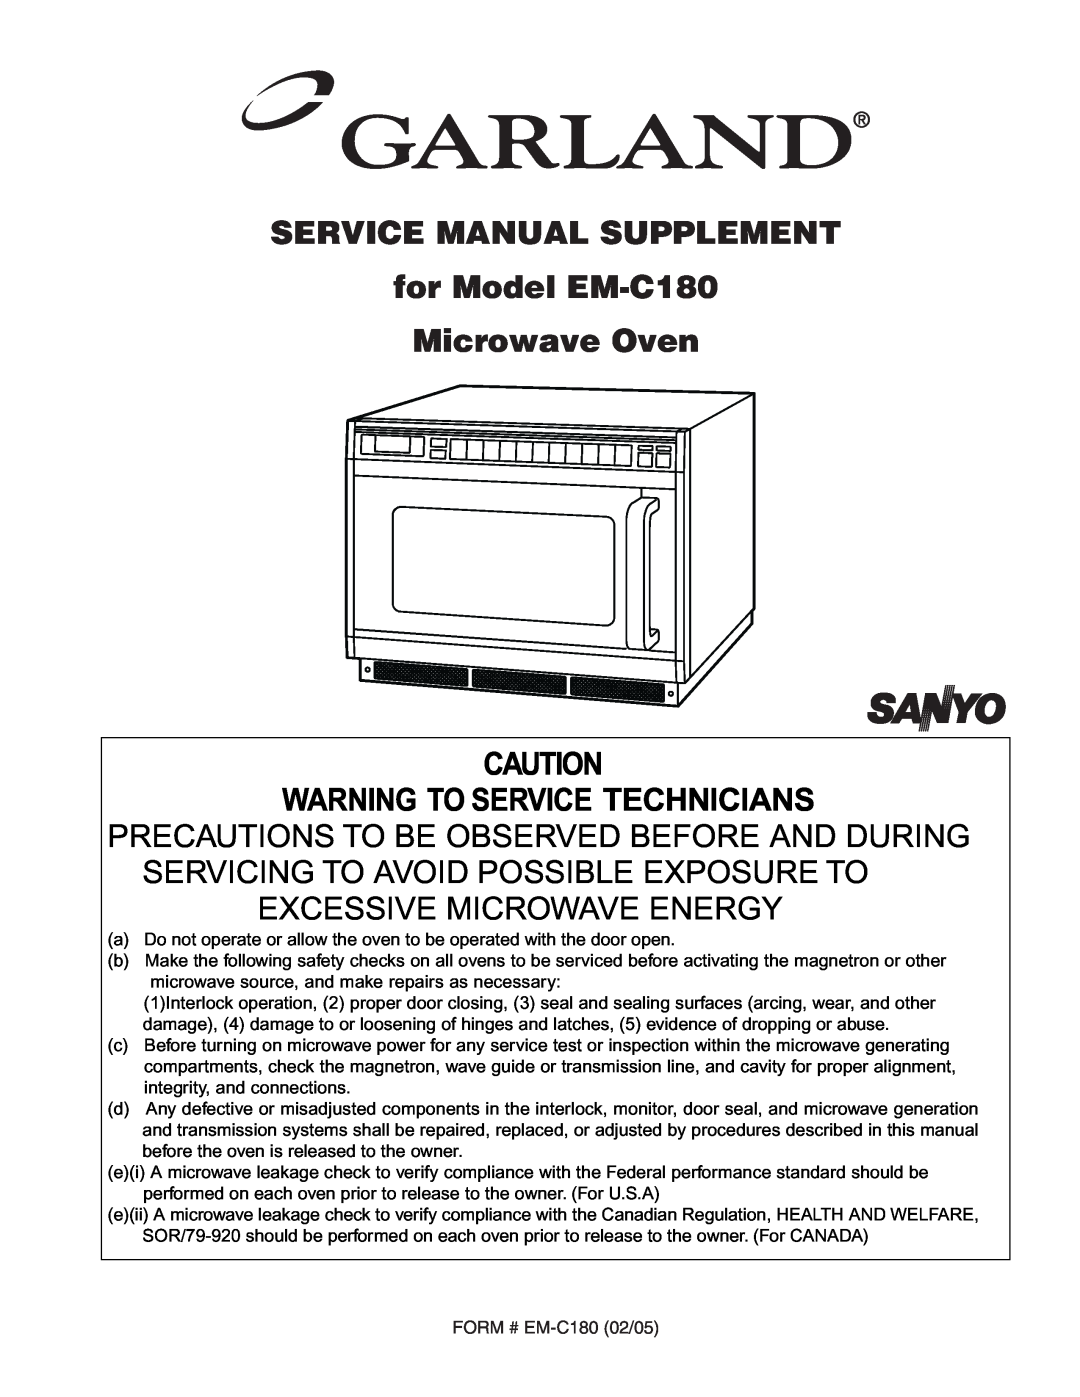 Garland EM-C180 service manual Warning To Service Technicians, Excessive Microwave Energy 